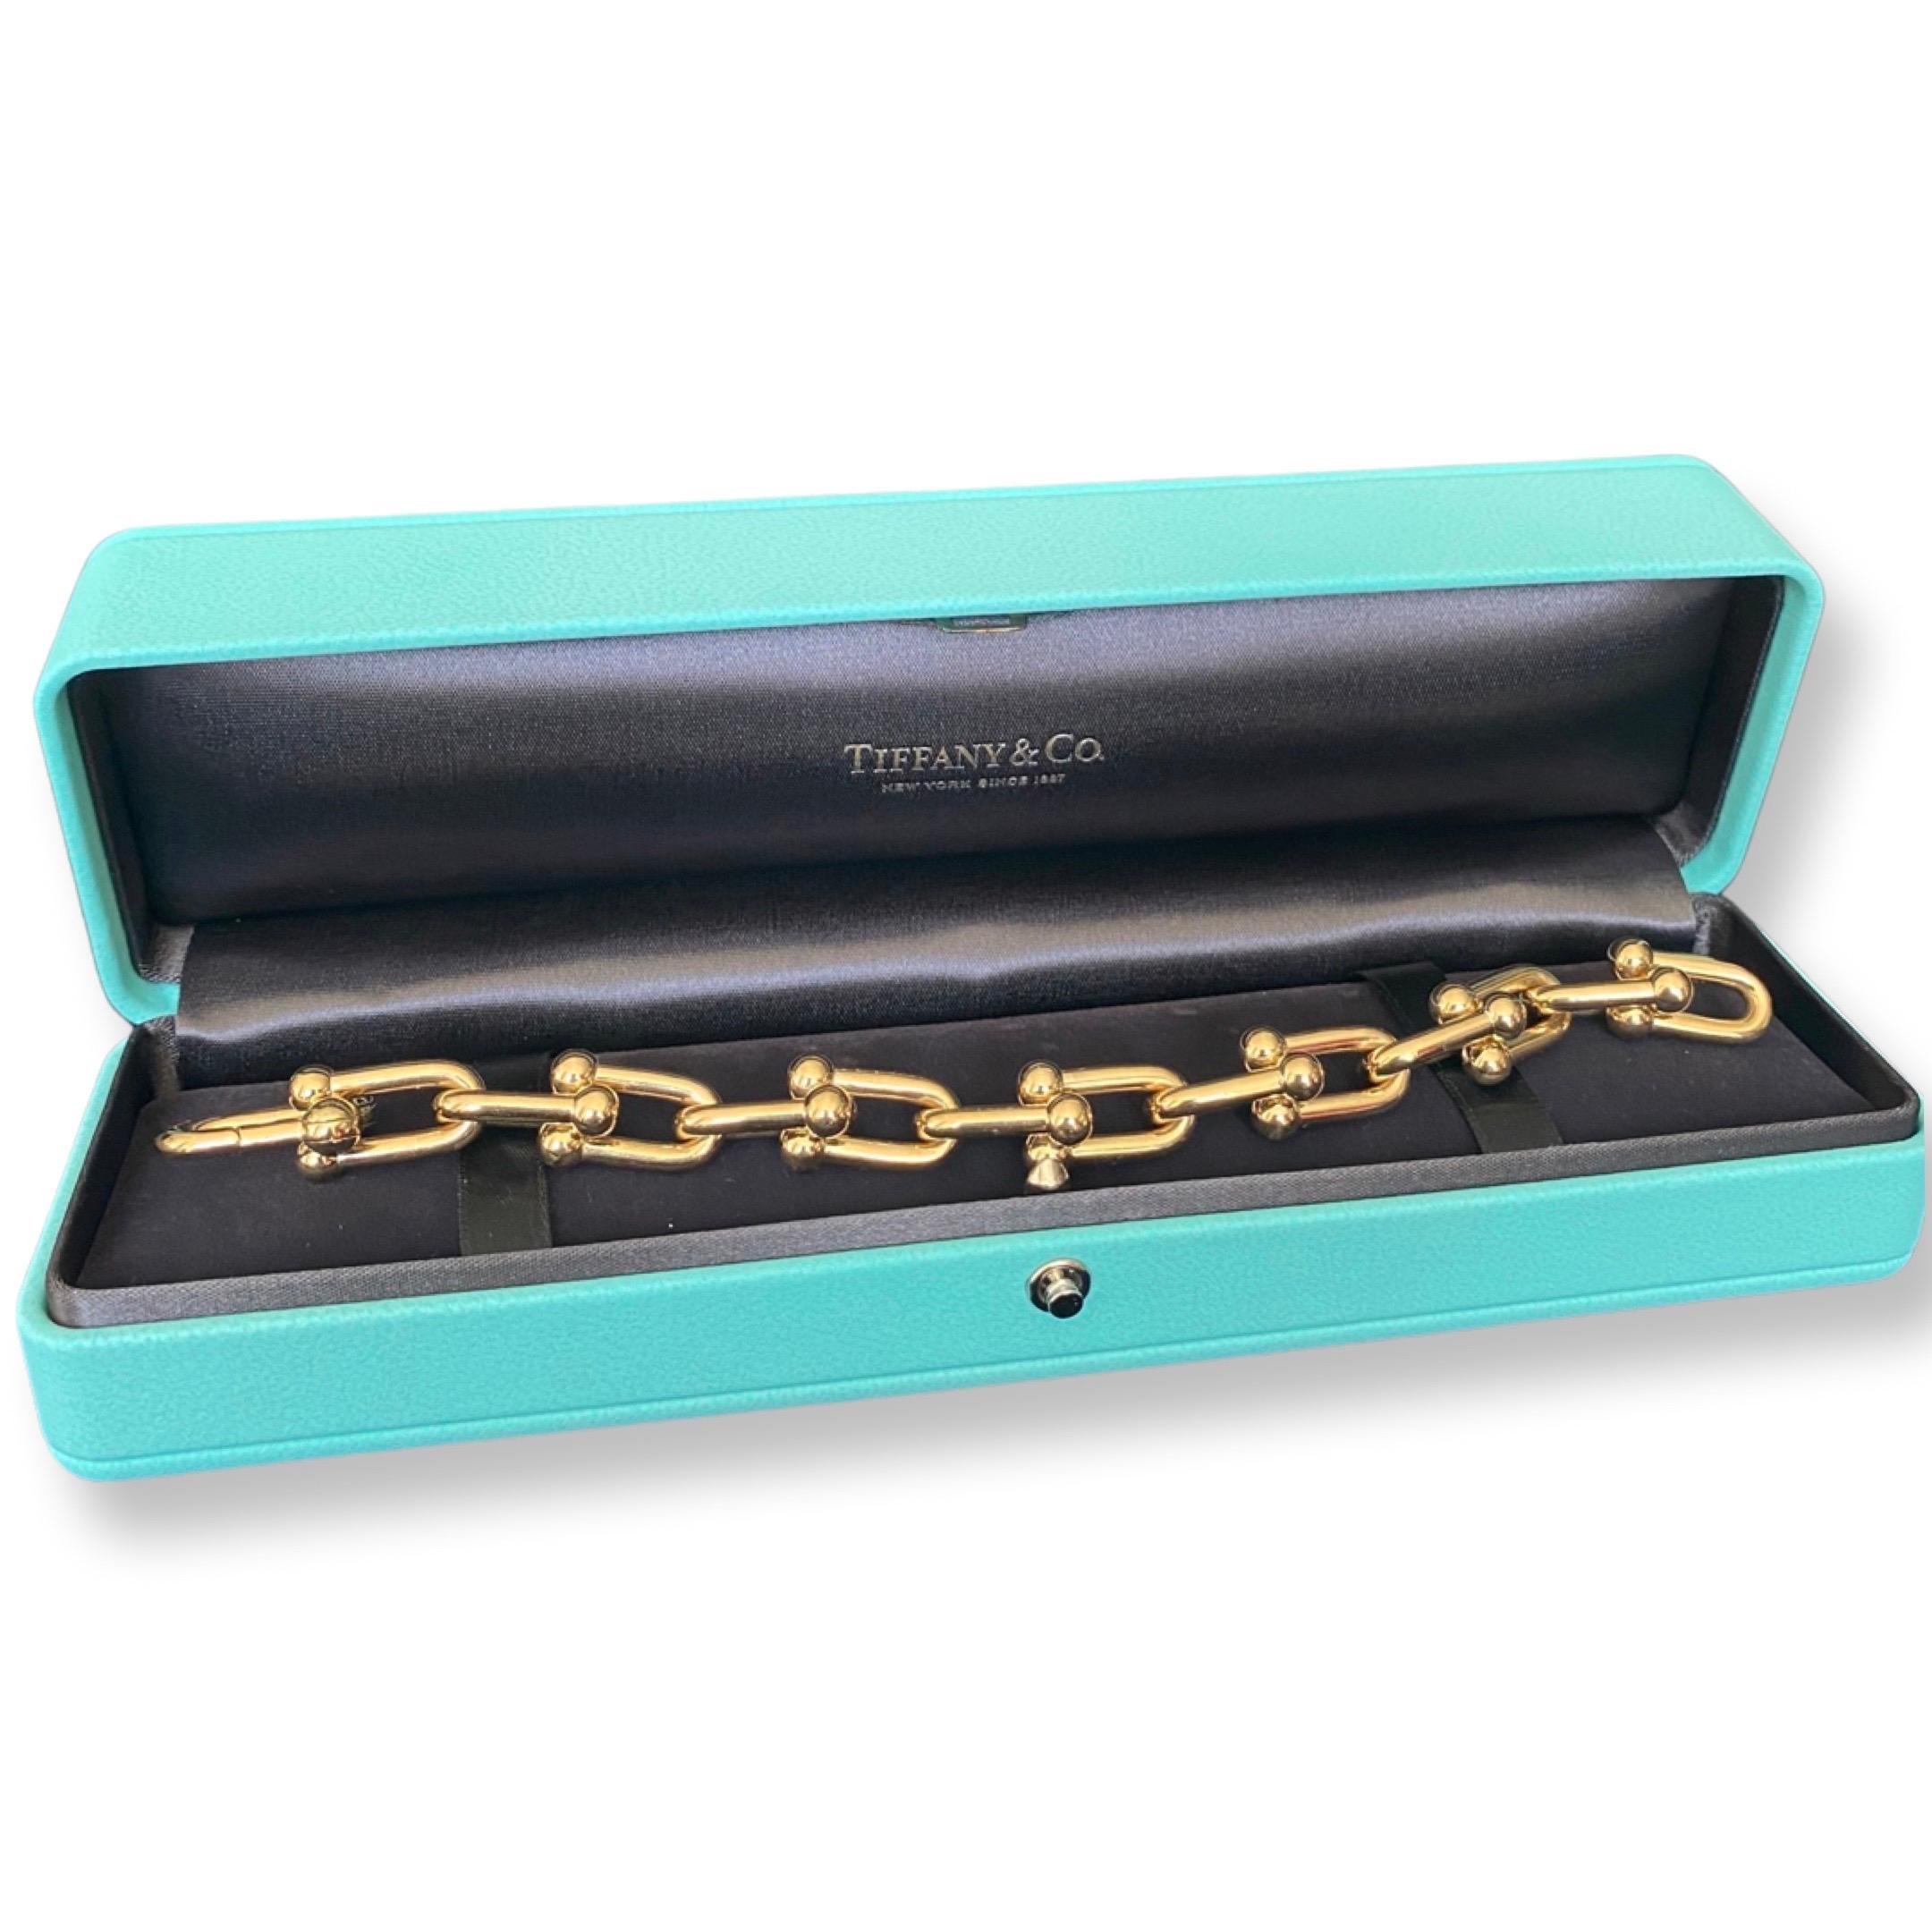 Tiffany Co Hardware large link bracelet 
size small 
18 k gold yellow gold chain links 
Condition: excellent , no defects 
Purchased in December 2022

Comes with: 
Tiffany Leather blue box
Tiffany Paper outer blue box
Copy of the proof of purchase